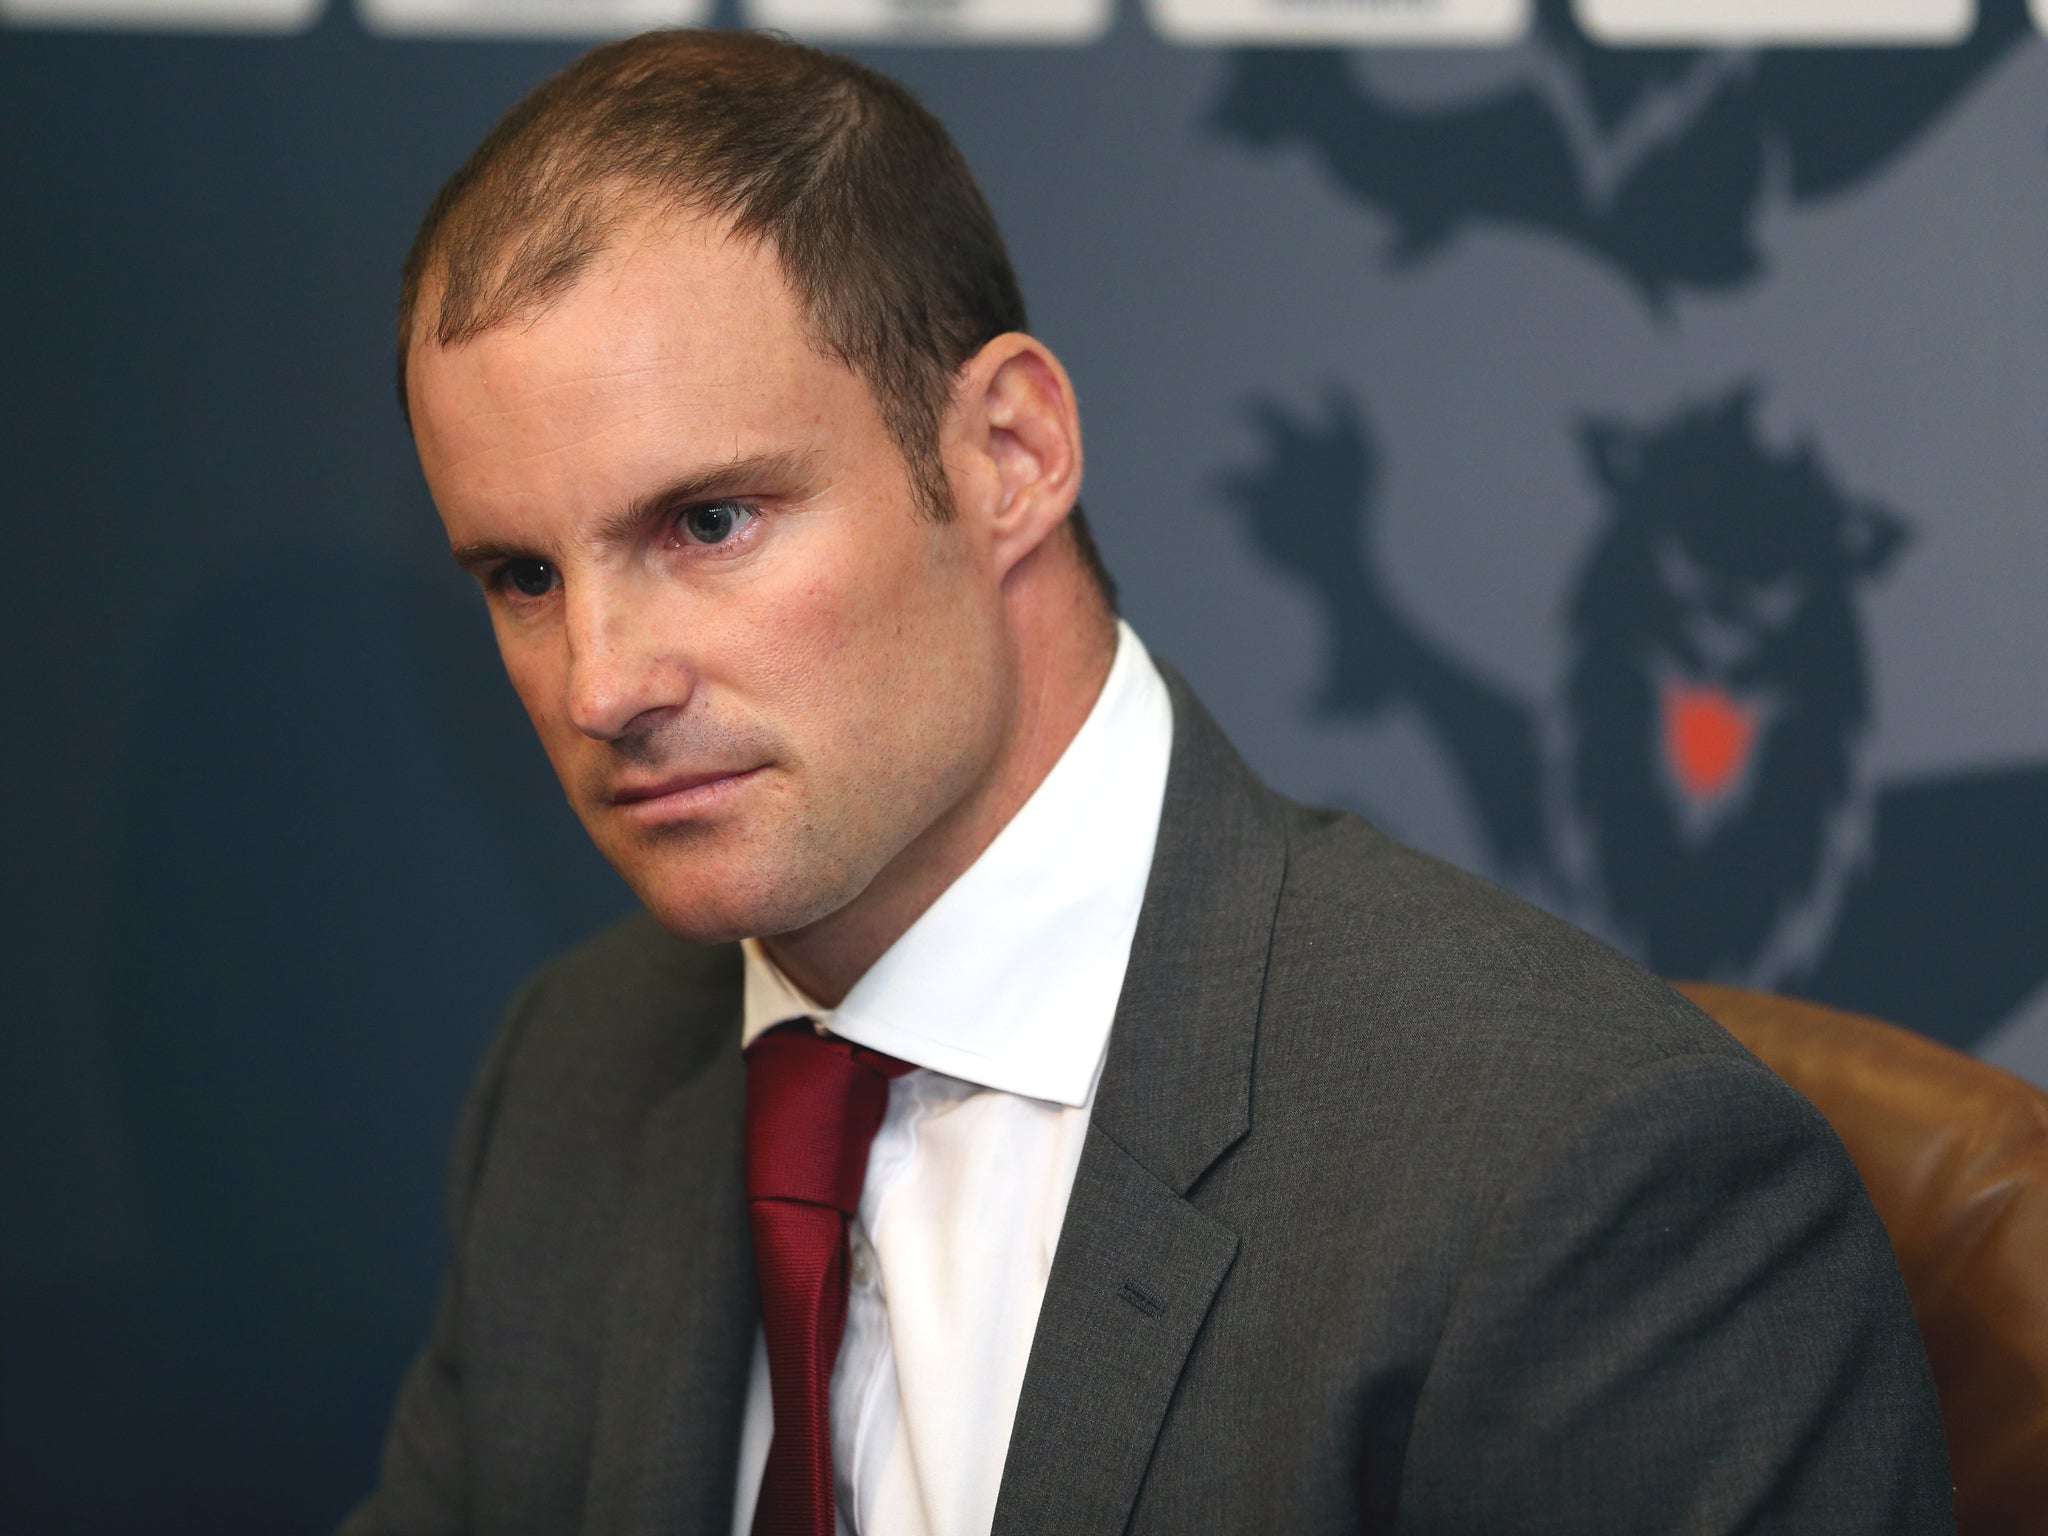 Andrew Strauss talks about his successor as England captain, Alastair Cook, how he is adjusting to life after cricket and gearing up to run the London Marathon